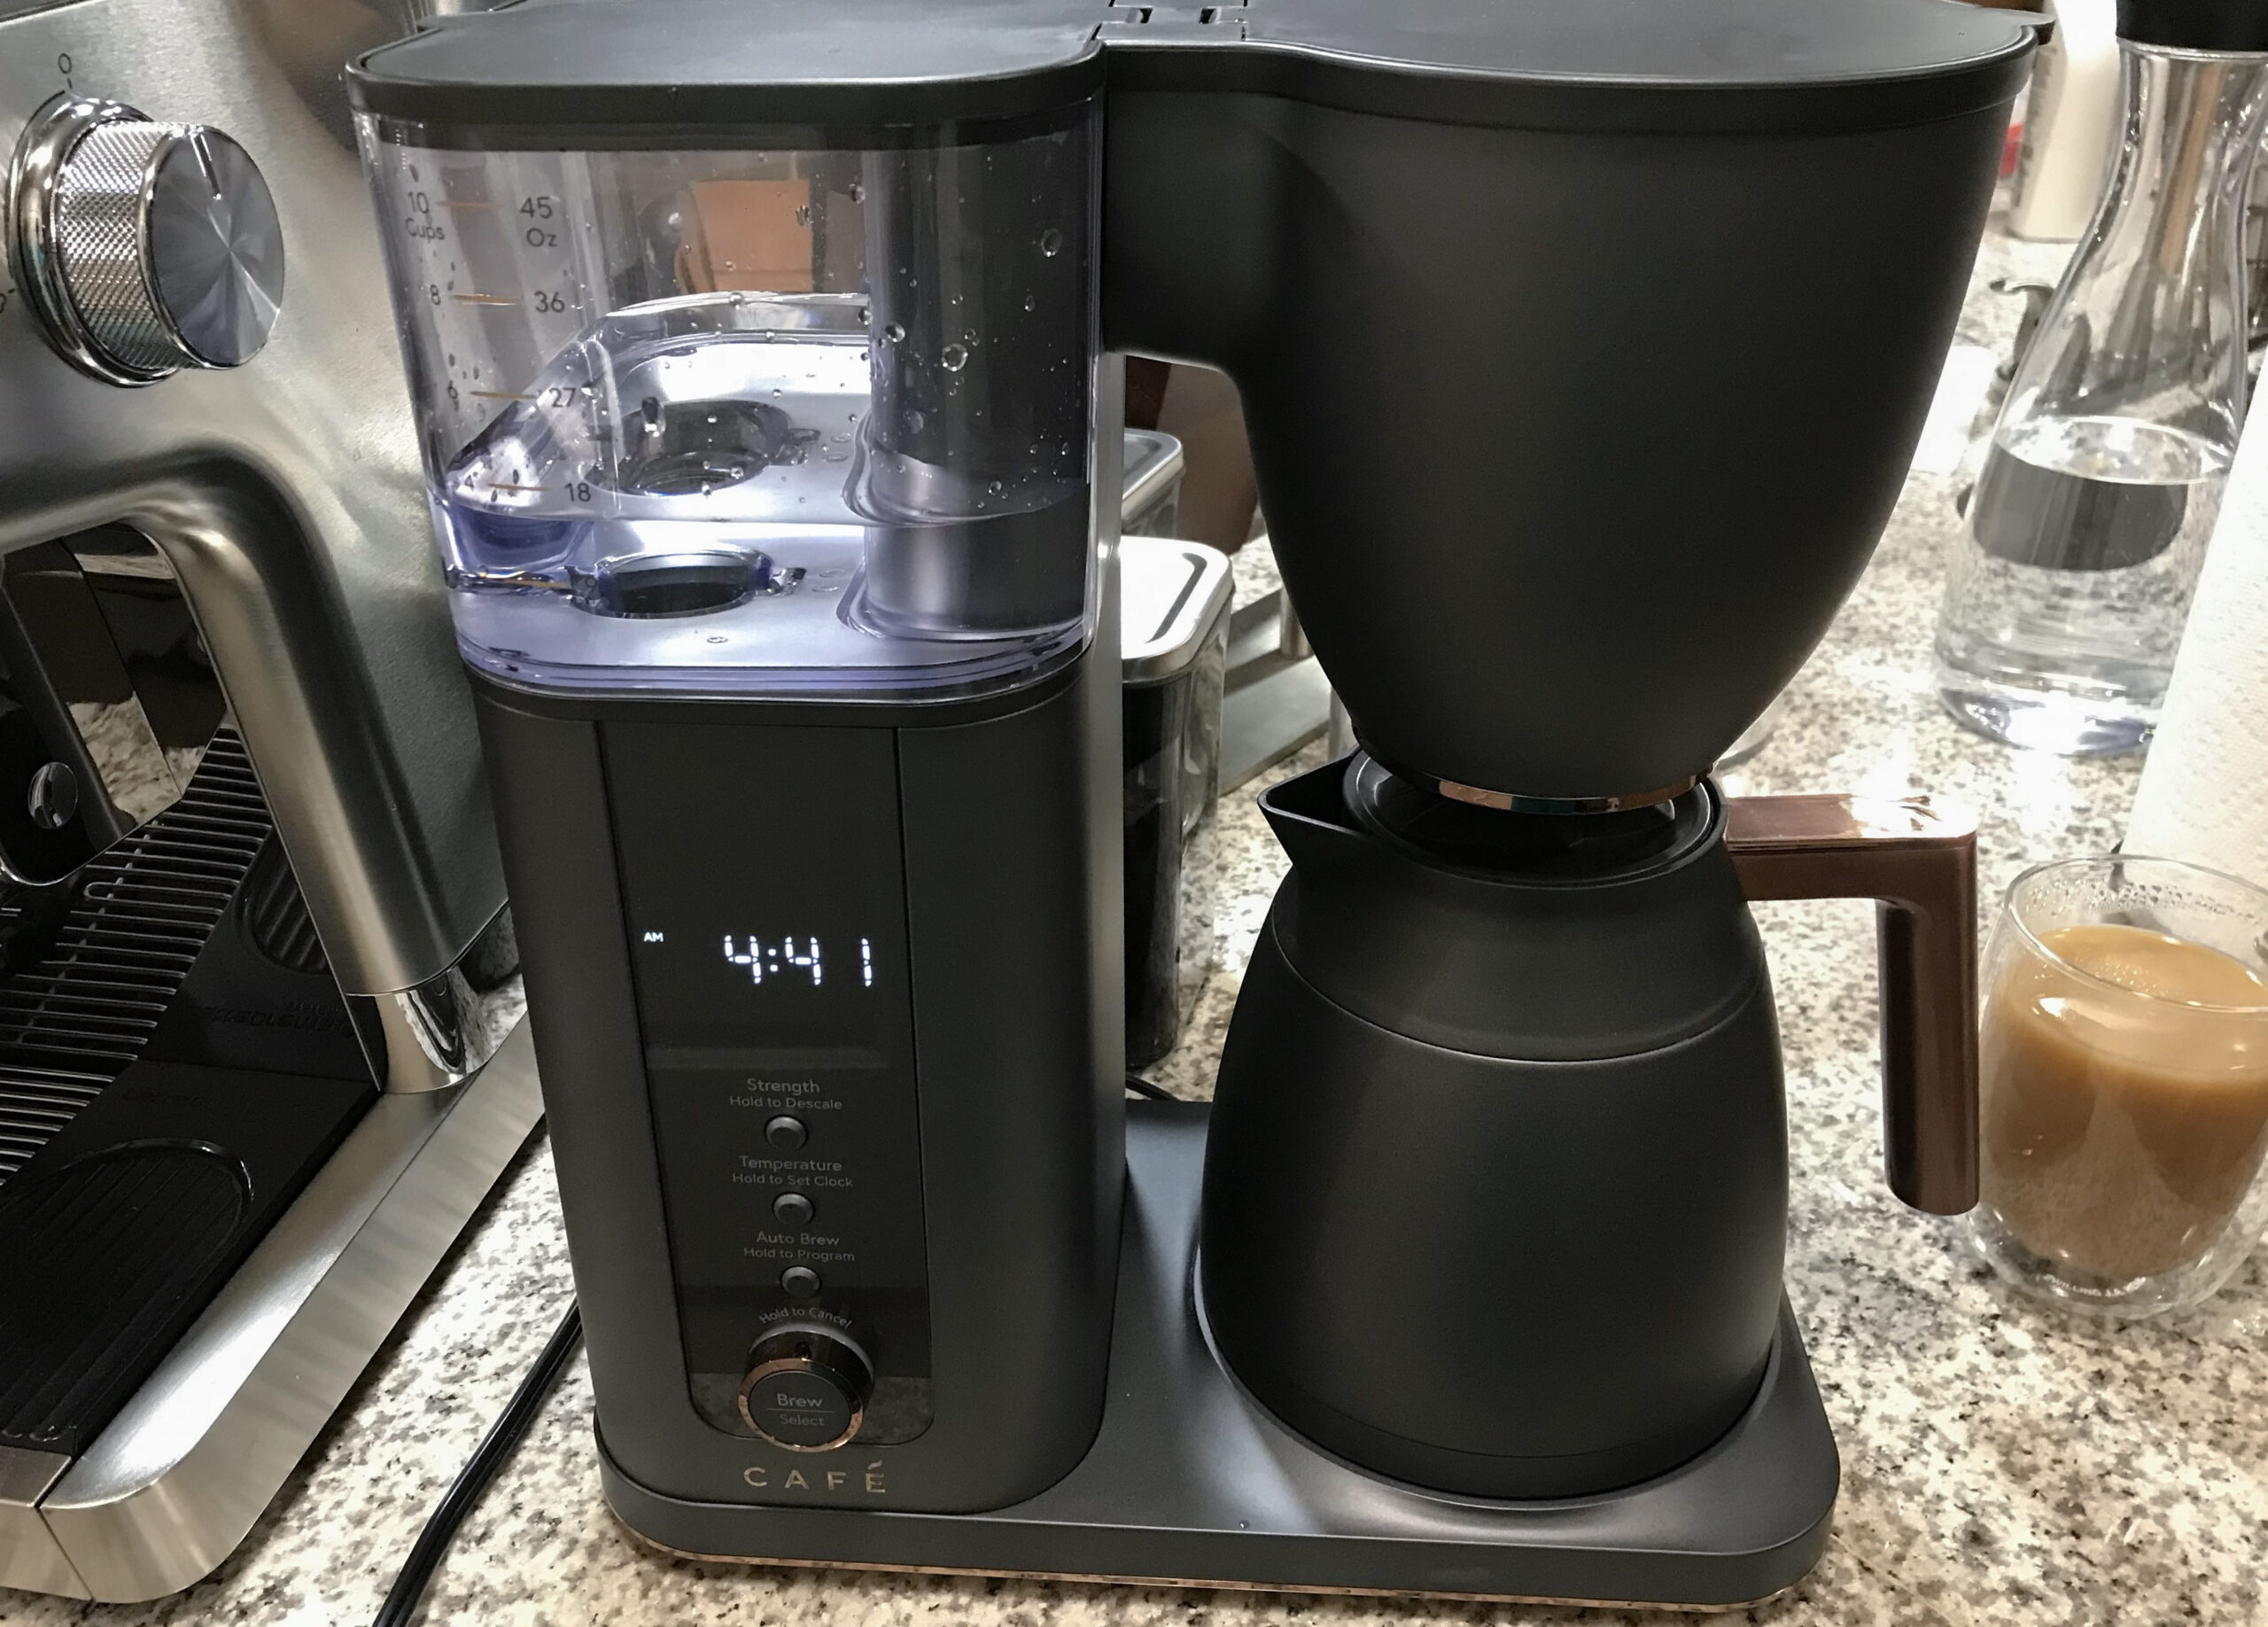 Cafe Specialty best smart drip coffee maker with a black carafe on a crowded kitchen counter